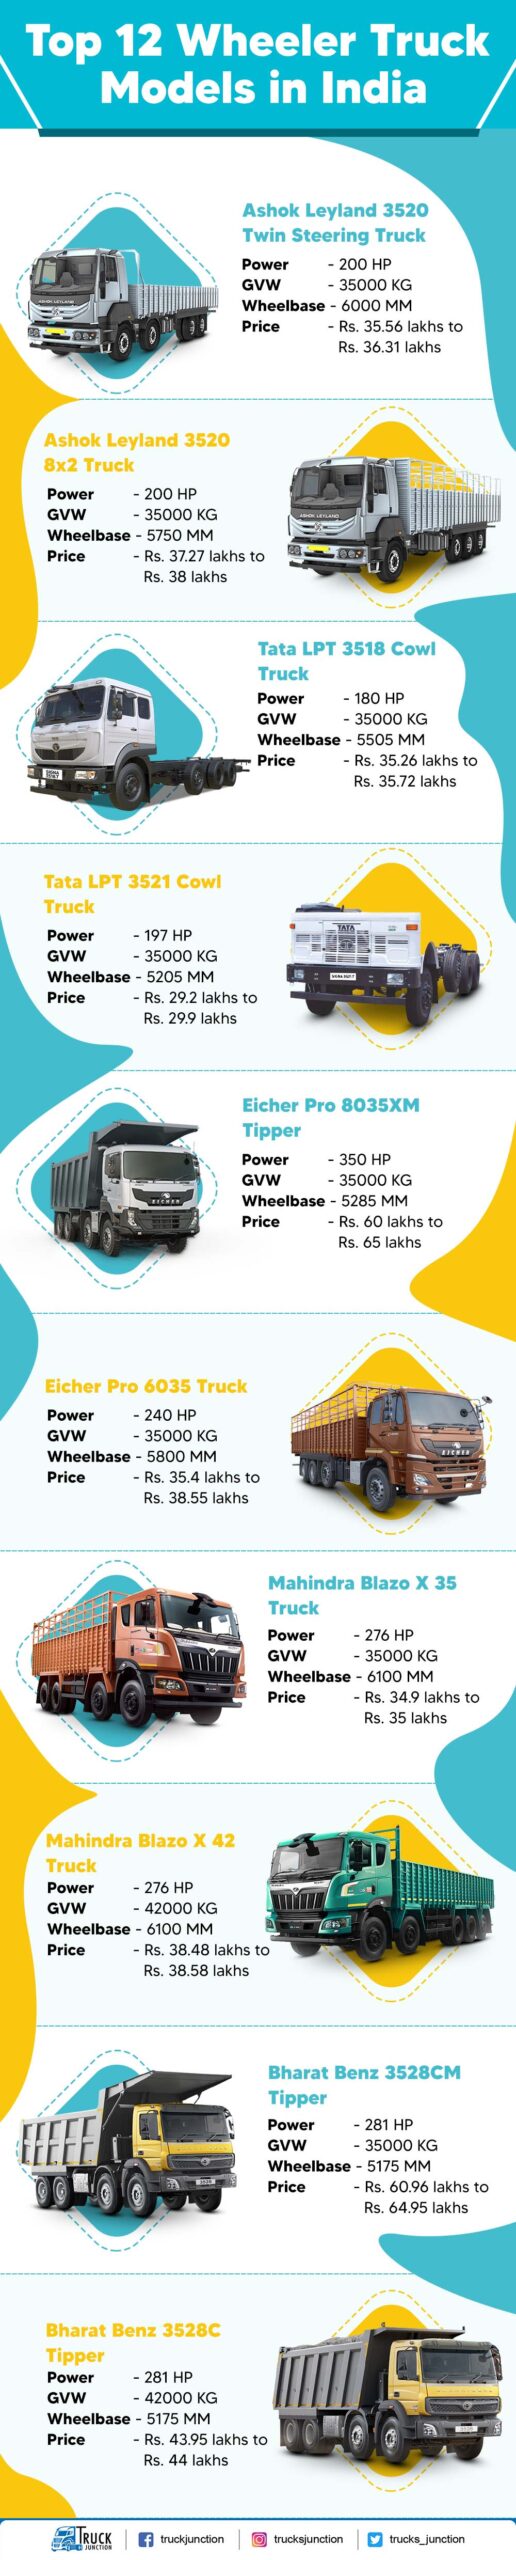 Top 12 Wheeler Truck Models in India infographic